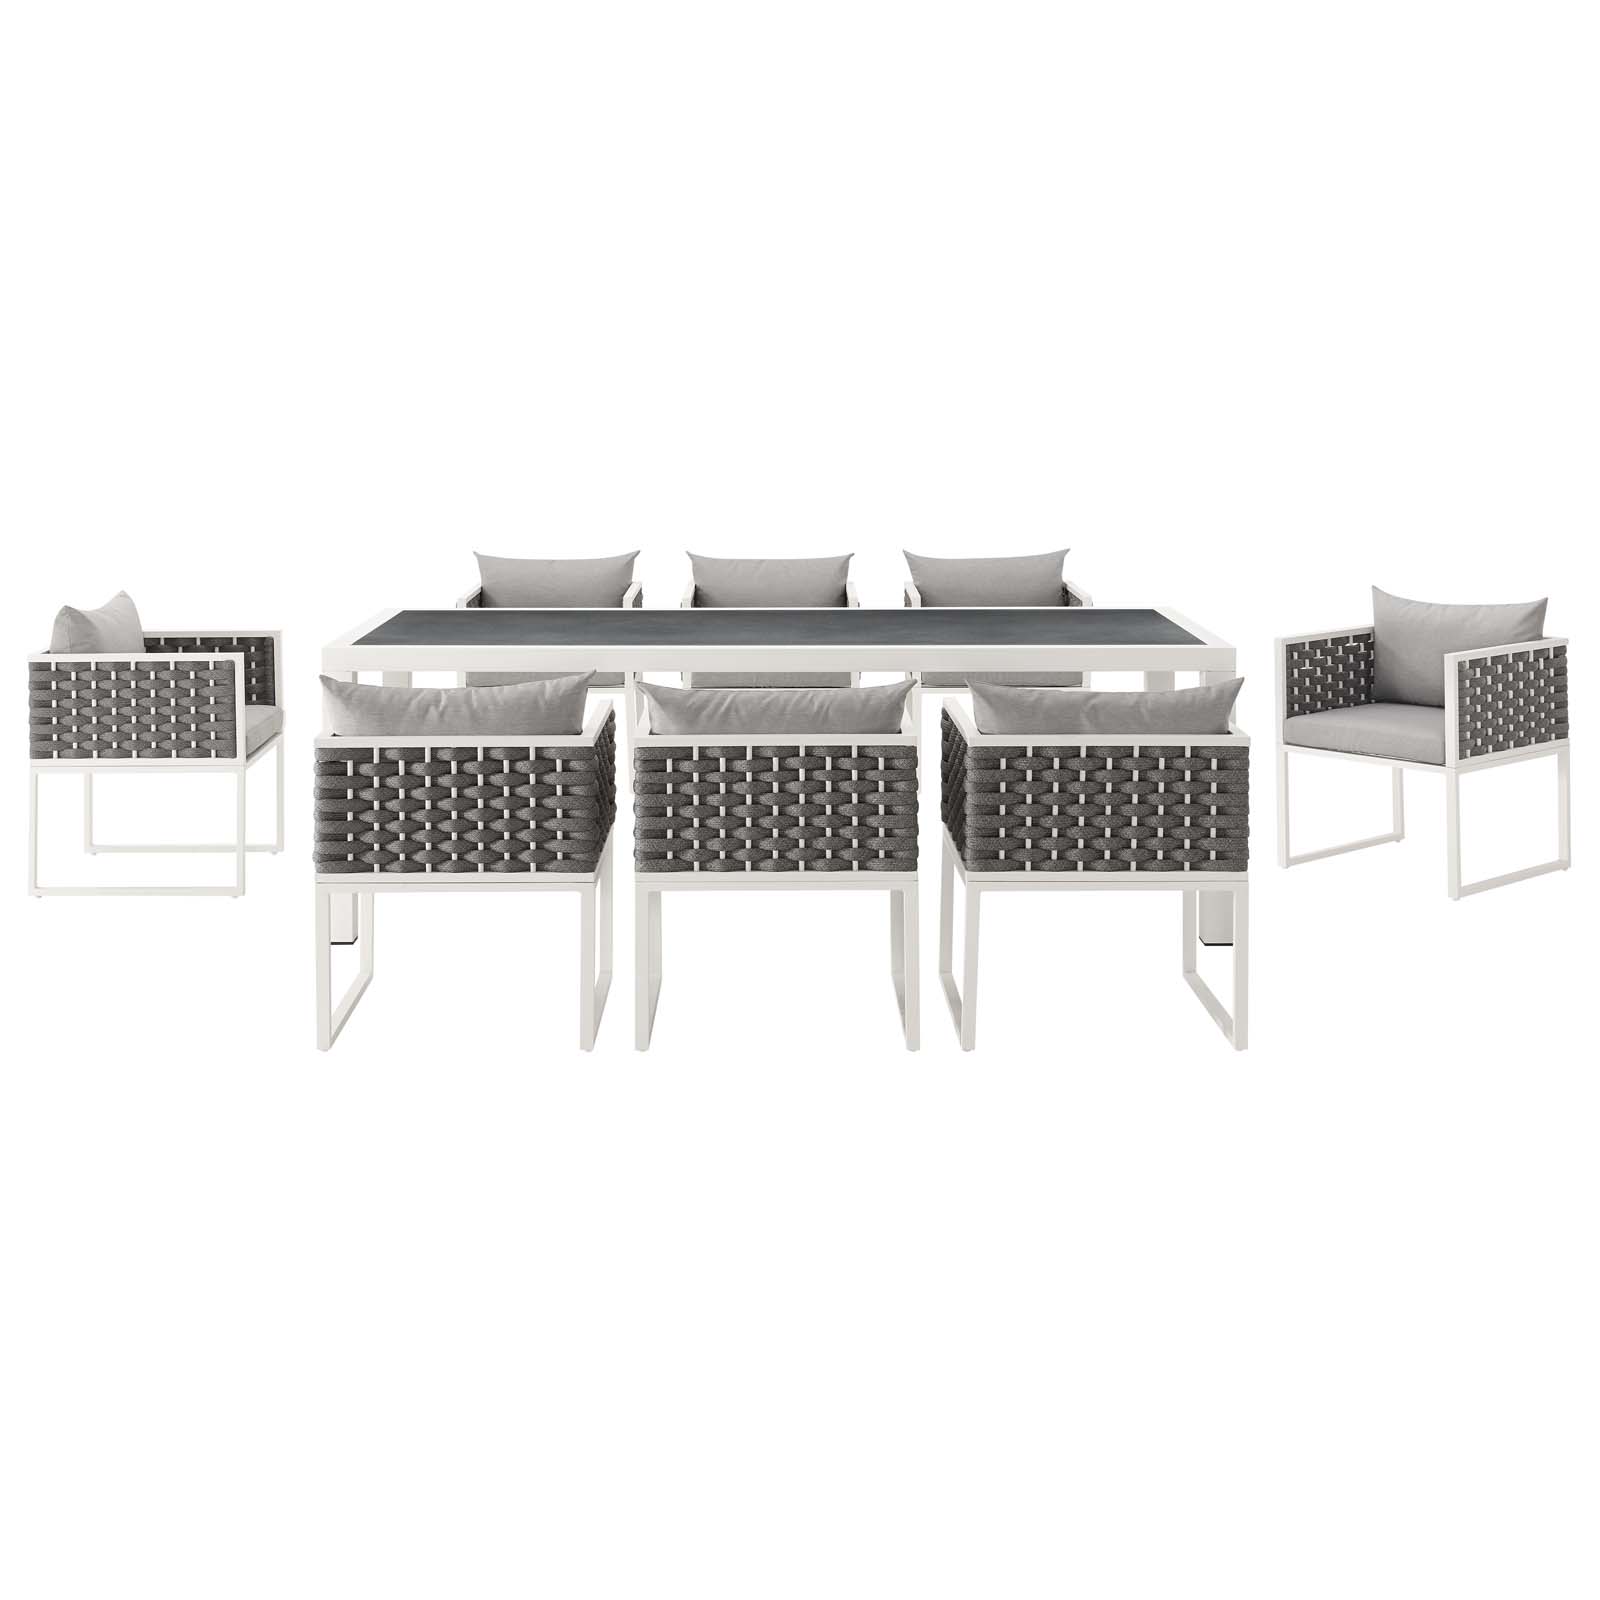 Contemporary Modern Urban Designer Outdoor Patio Balcony Garden Furniture Side Dining Chair and Table Set, Aluminum Fabric, White Grey Gray - image 4 of 8